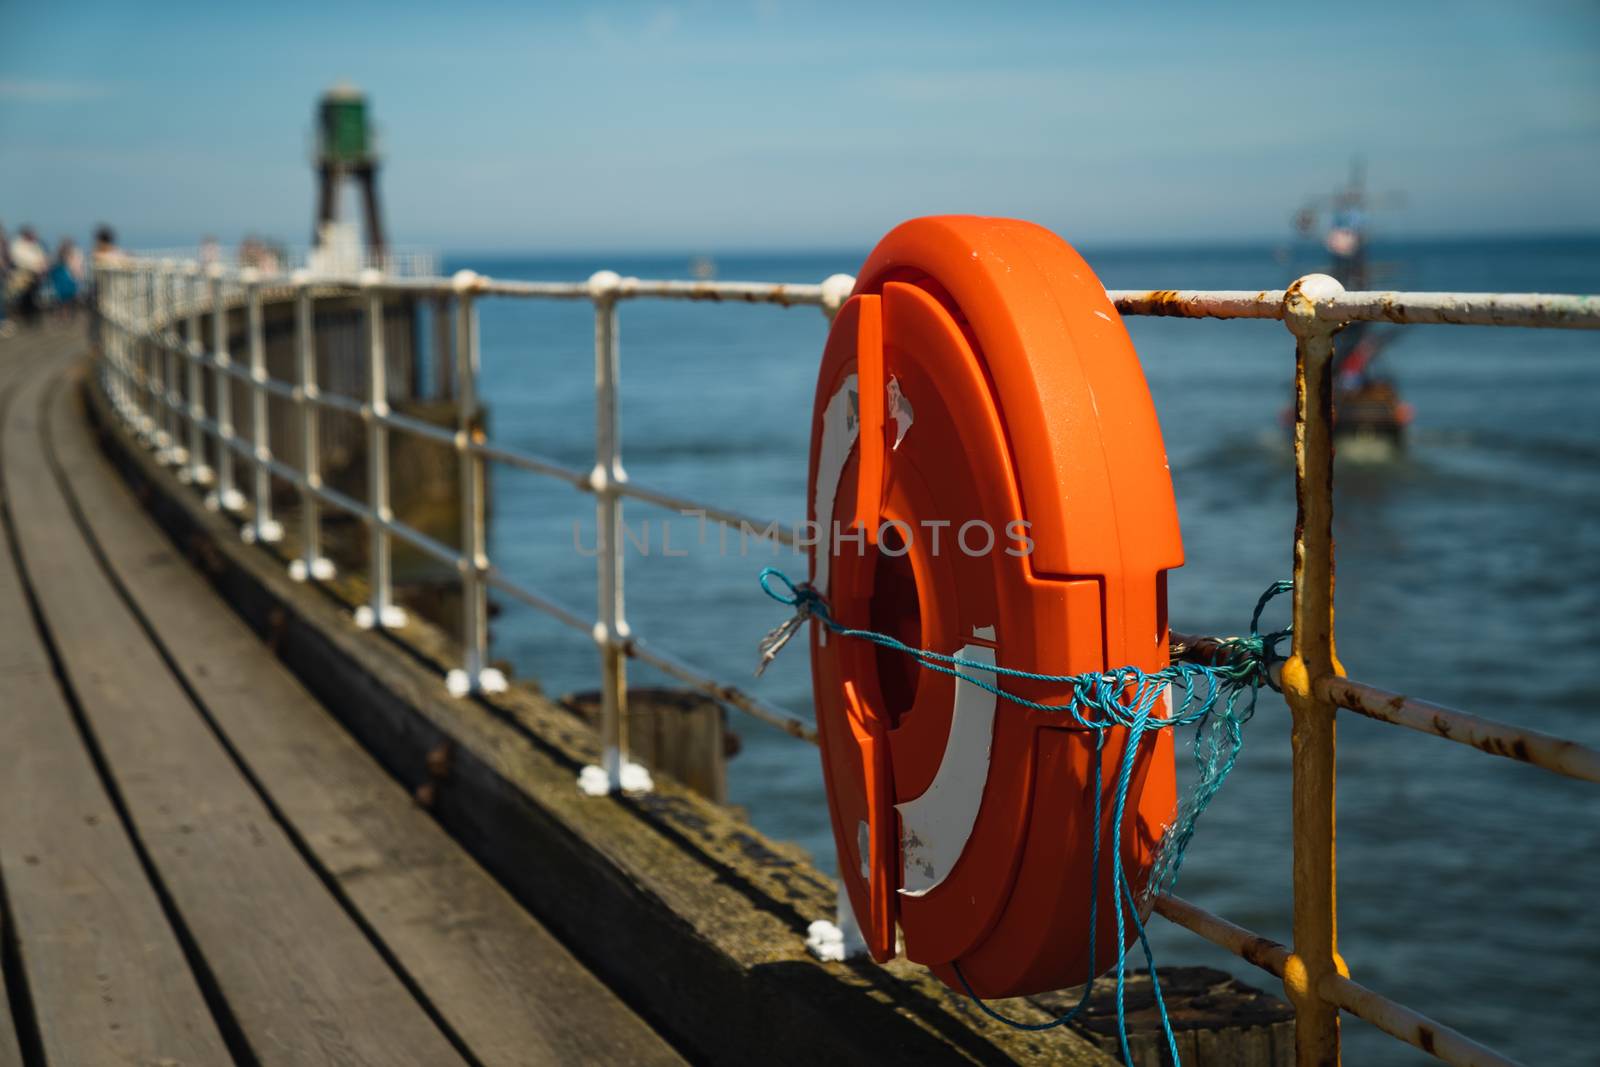 The pier in Whitby in North Yorkshire, England with an orange lifebuoy ring in the foreground